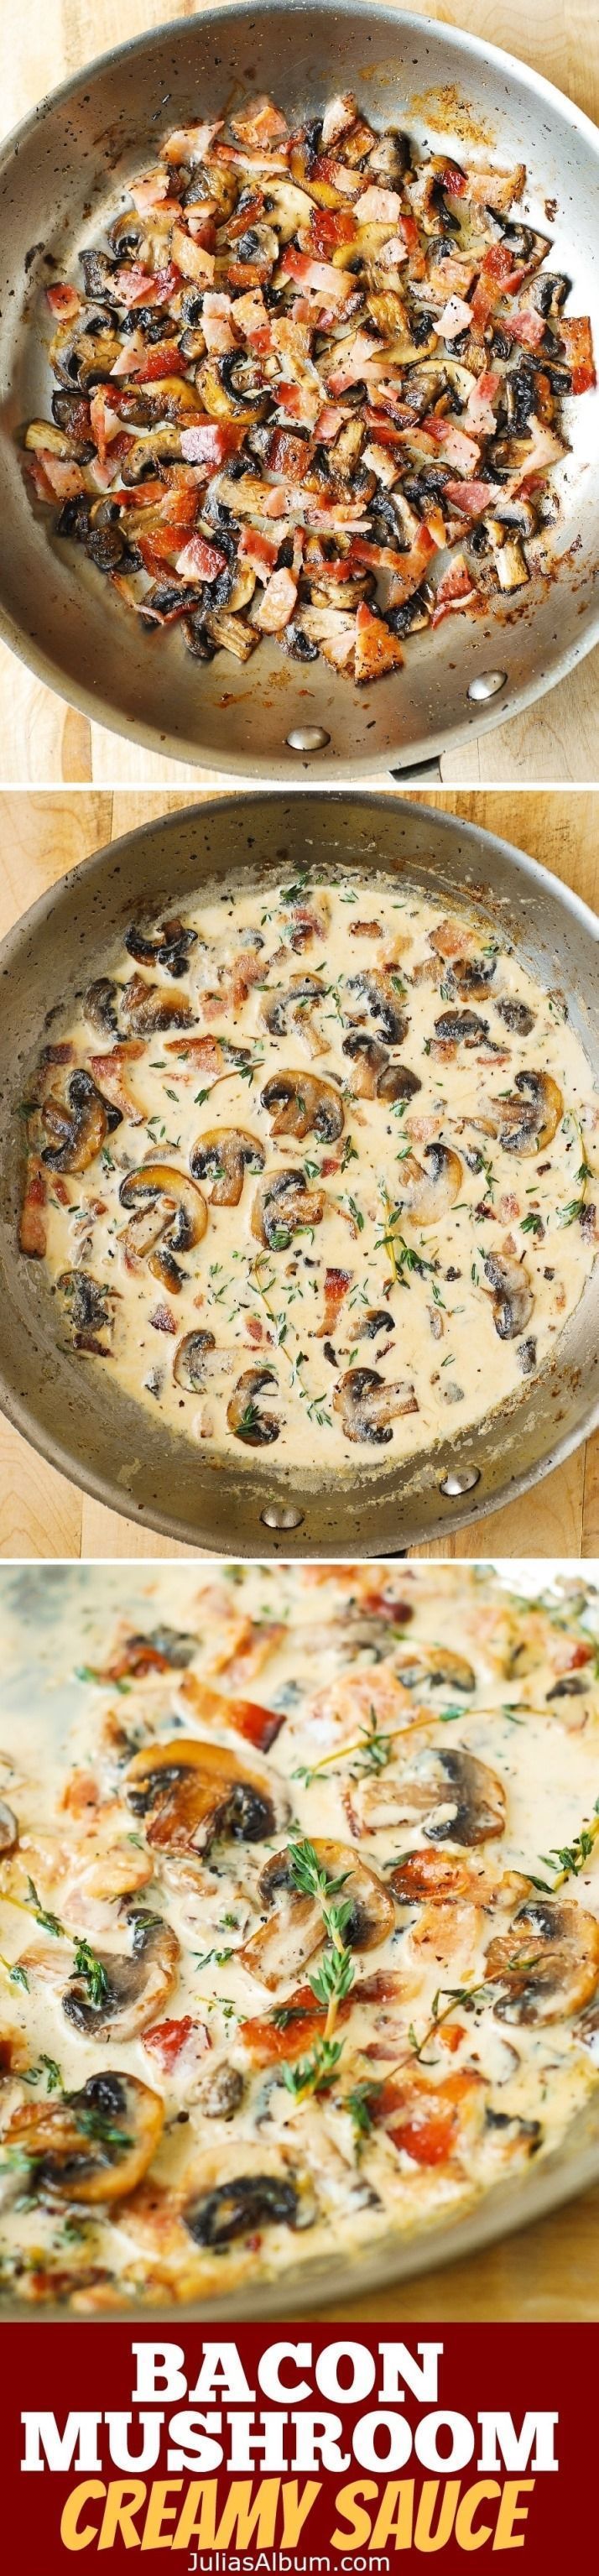 Creamy Mushroom Sauce with Bacon and Thyme – a great accompaniment to baked and grilled meats, chicken, pork, steaks. Gluten free,